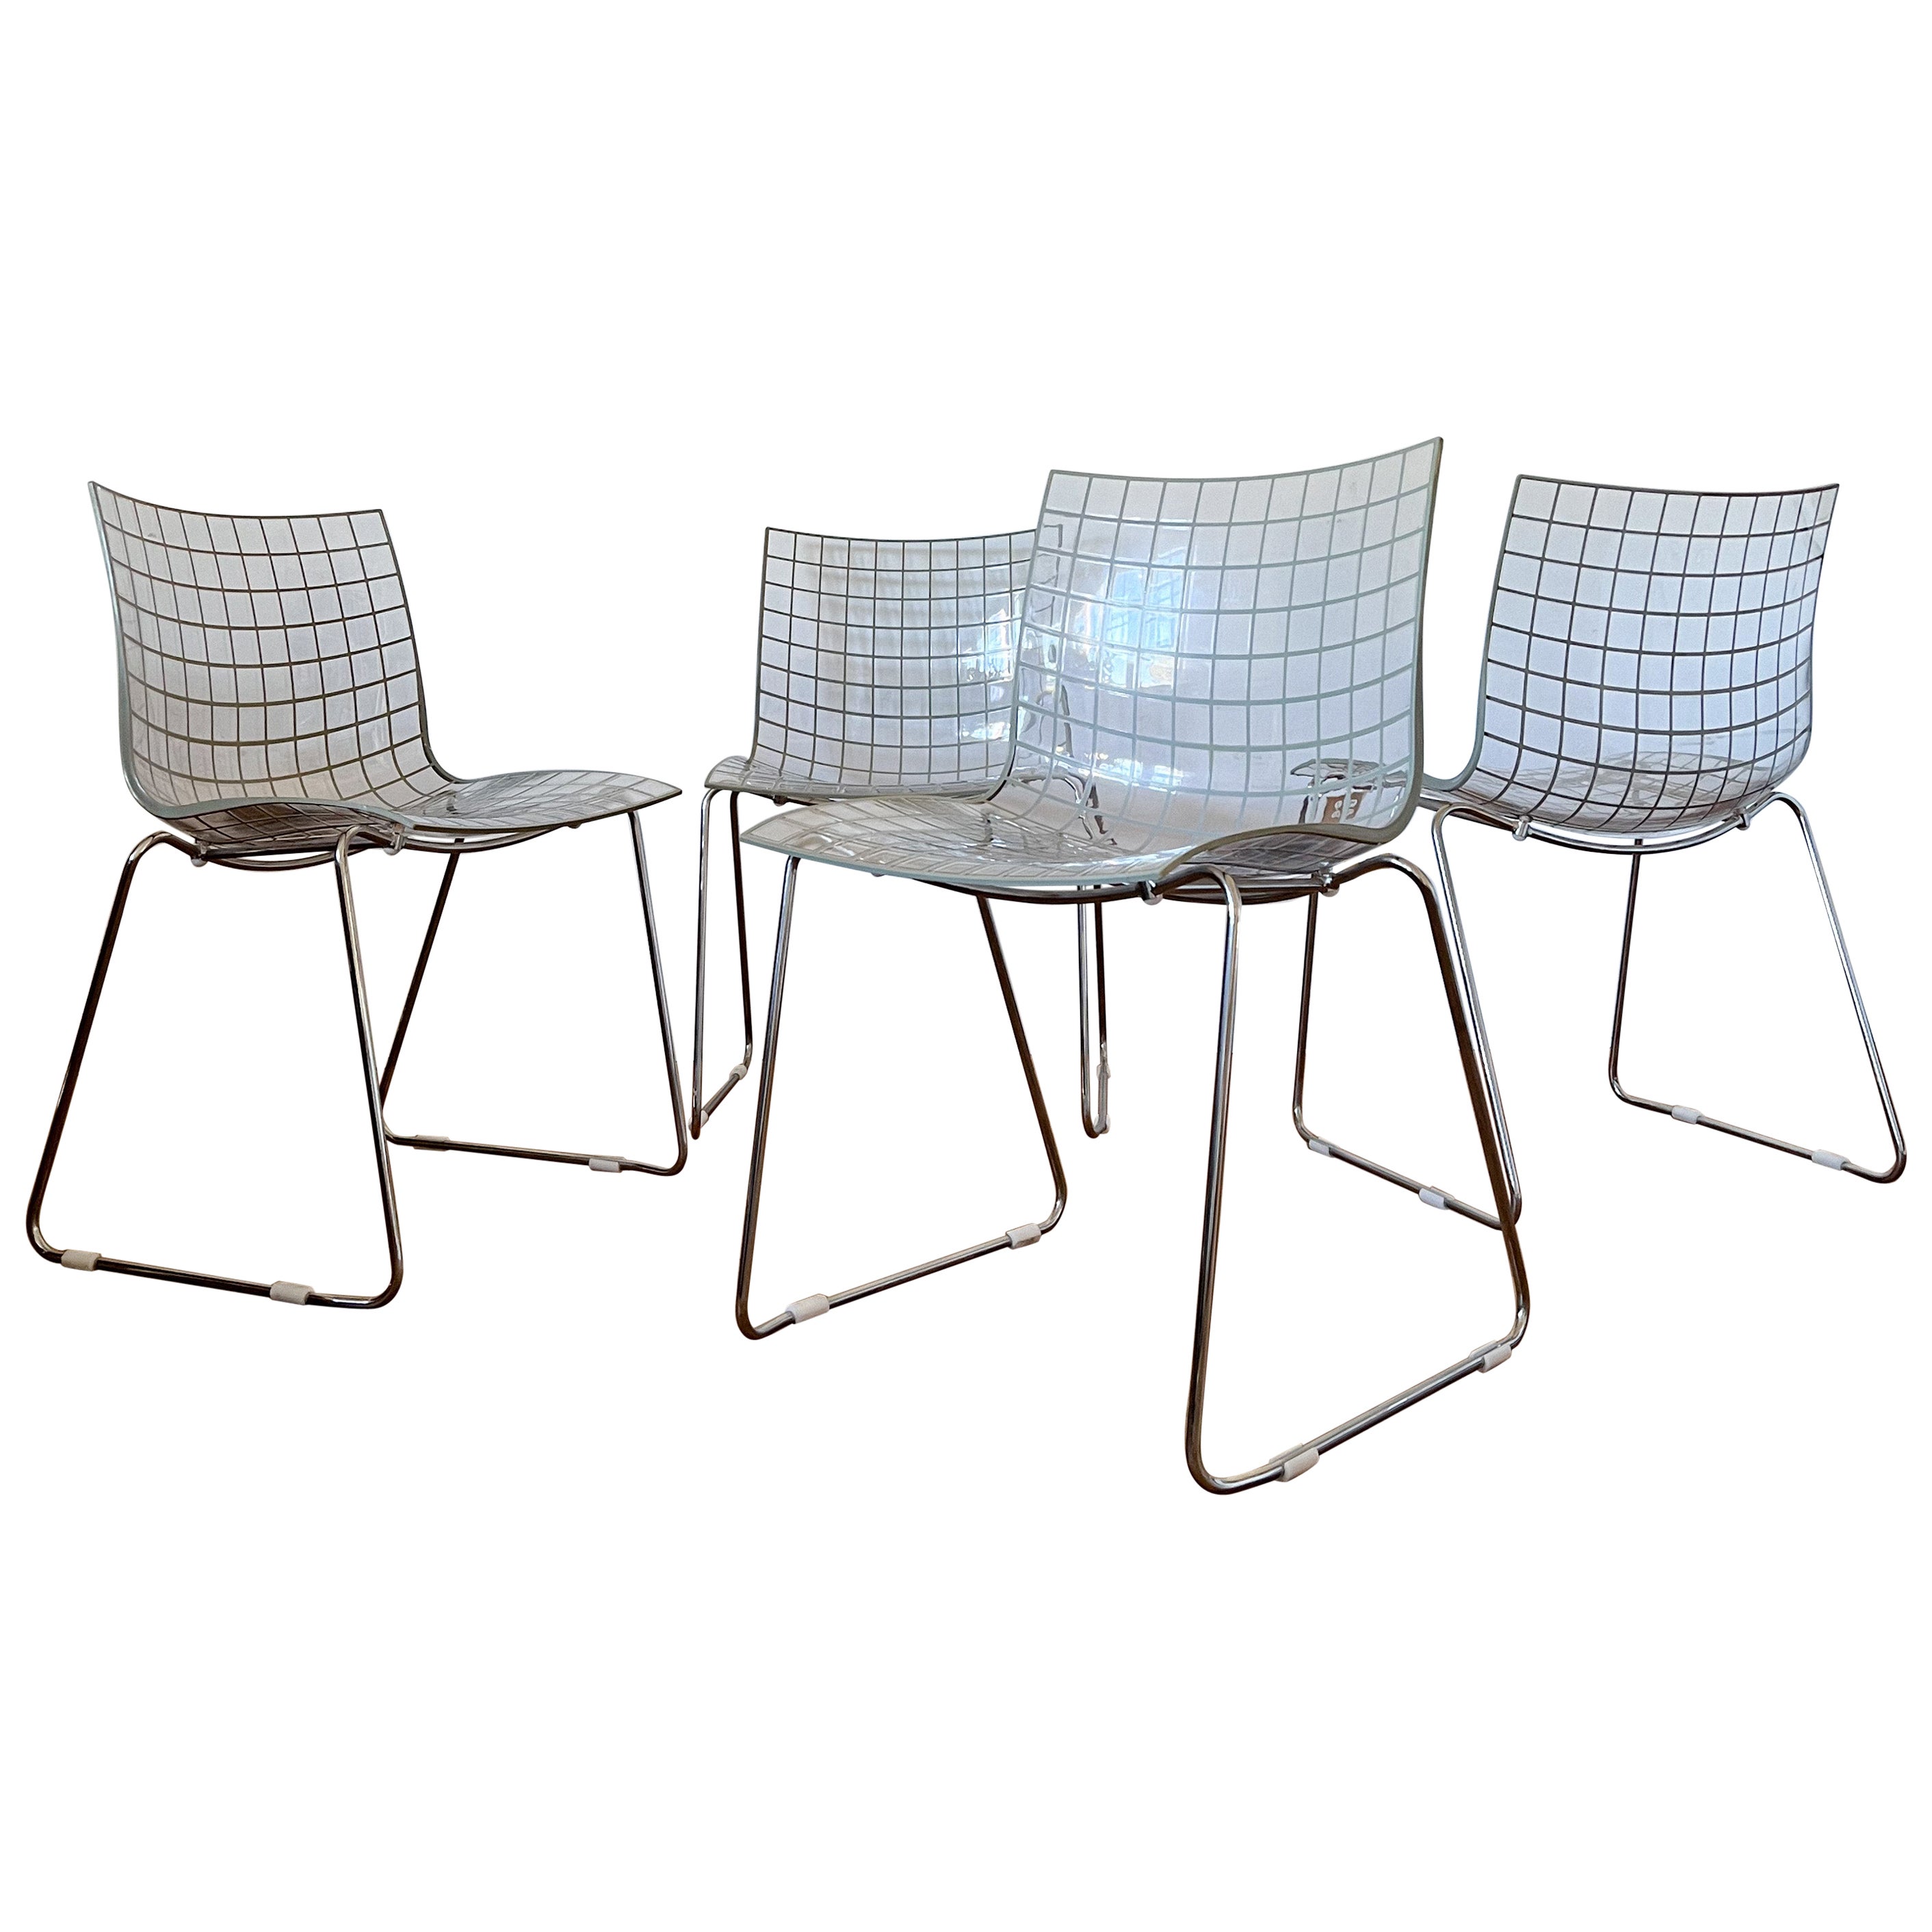 1990s Set of 4 Italian X3 Chairs by Marco Maran for Max Design